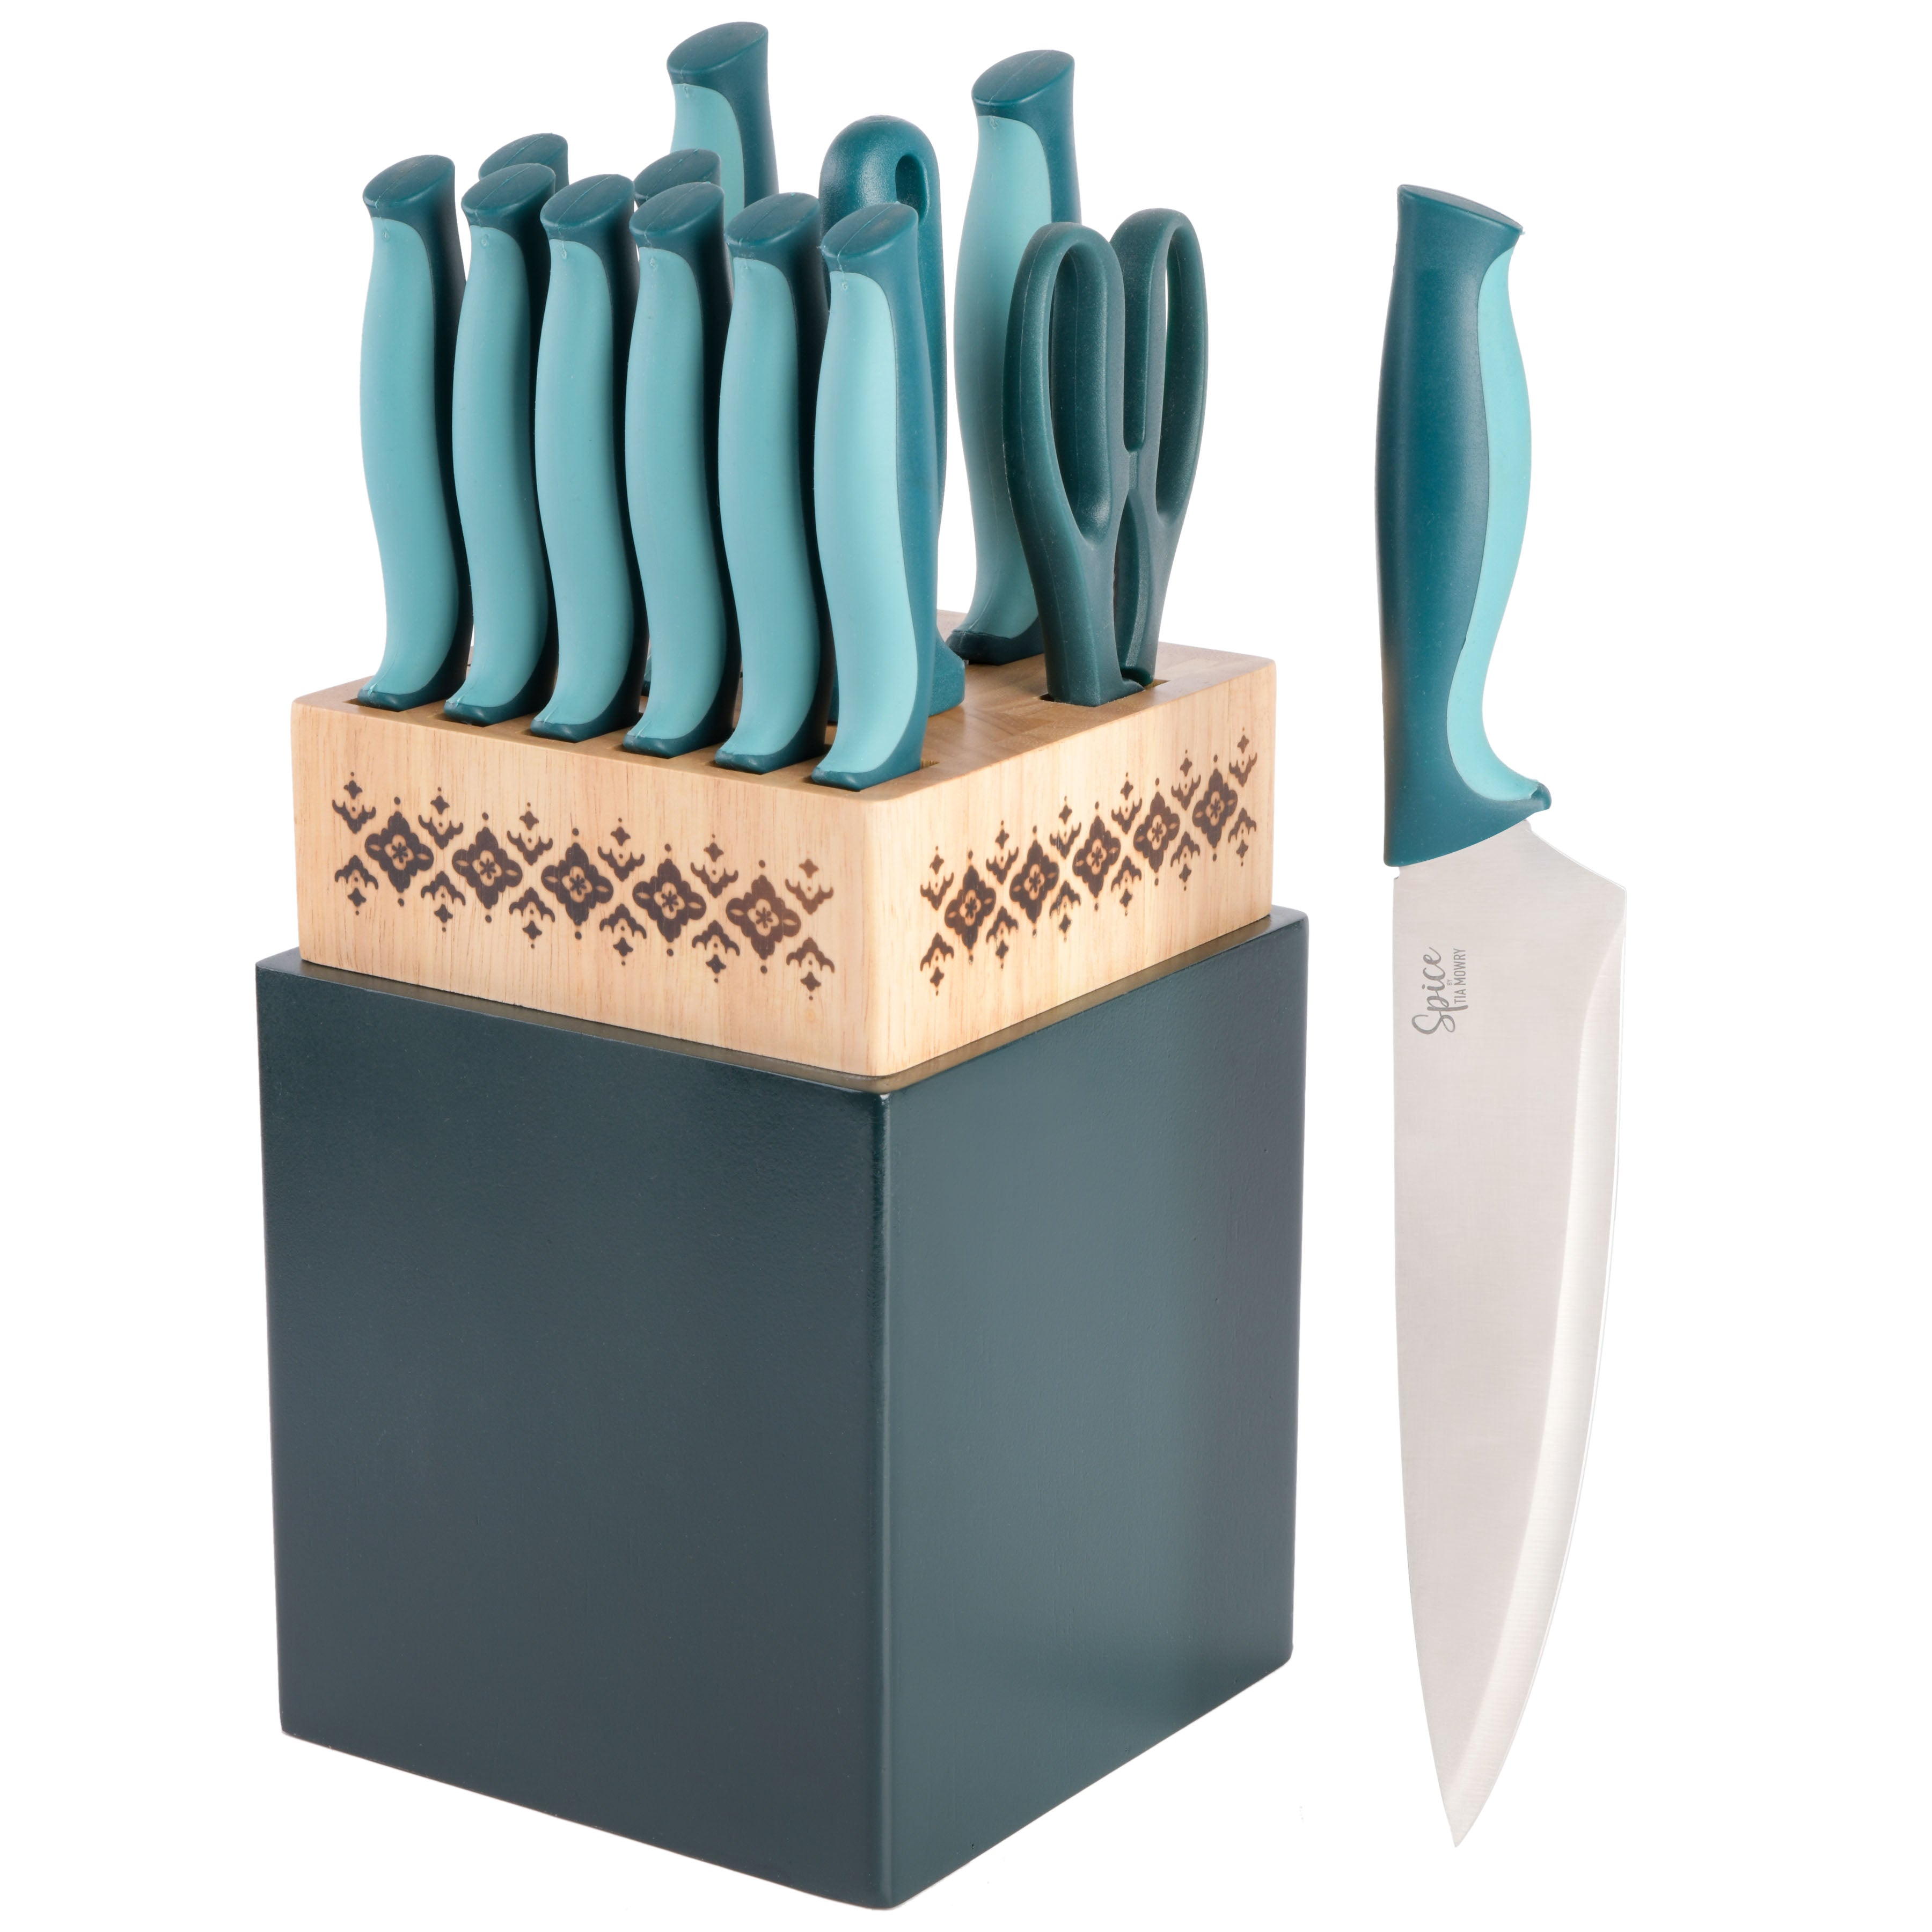 Gibson Home Village Vines 3 Piece Plastic Cutting Board and Knife Set in Red and Blue